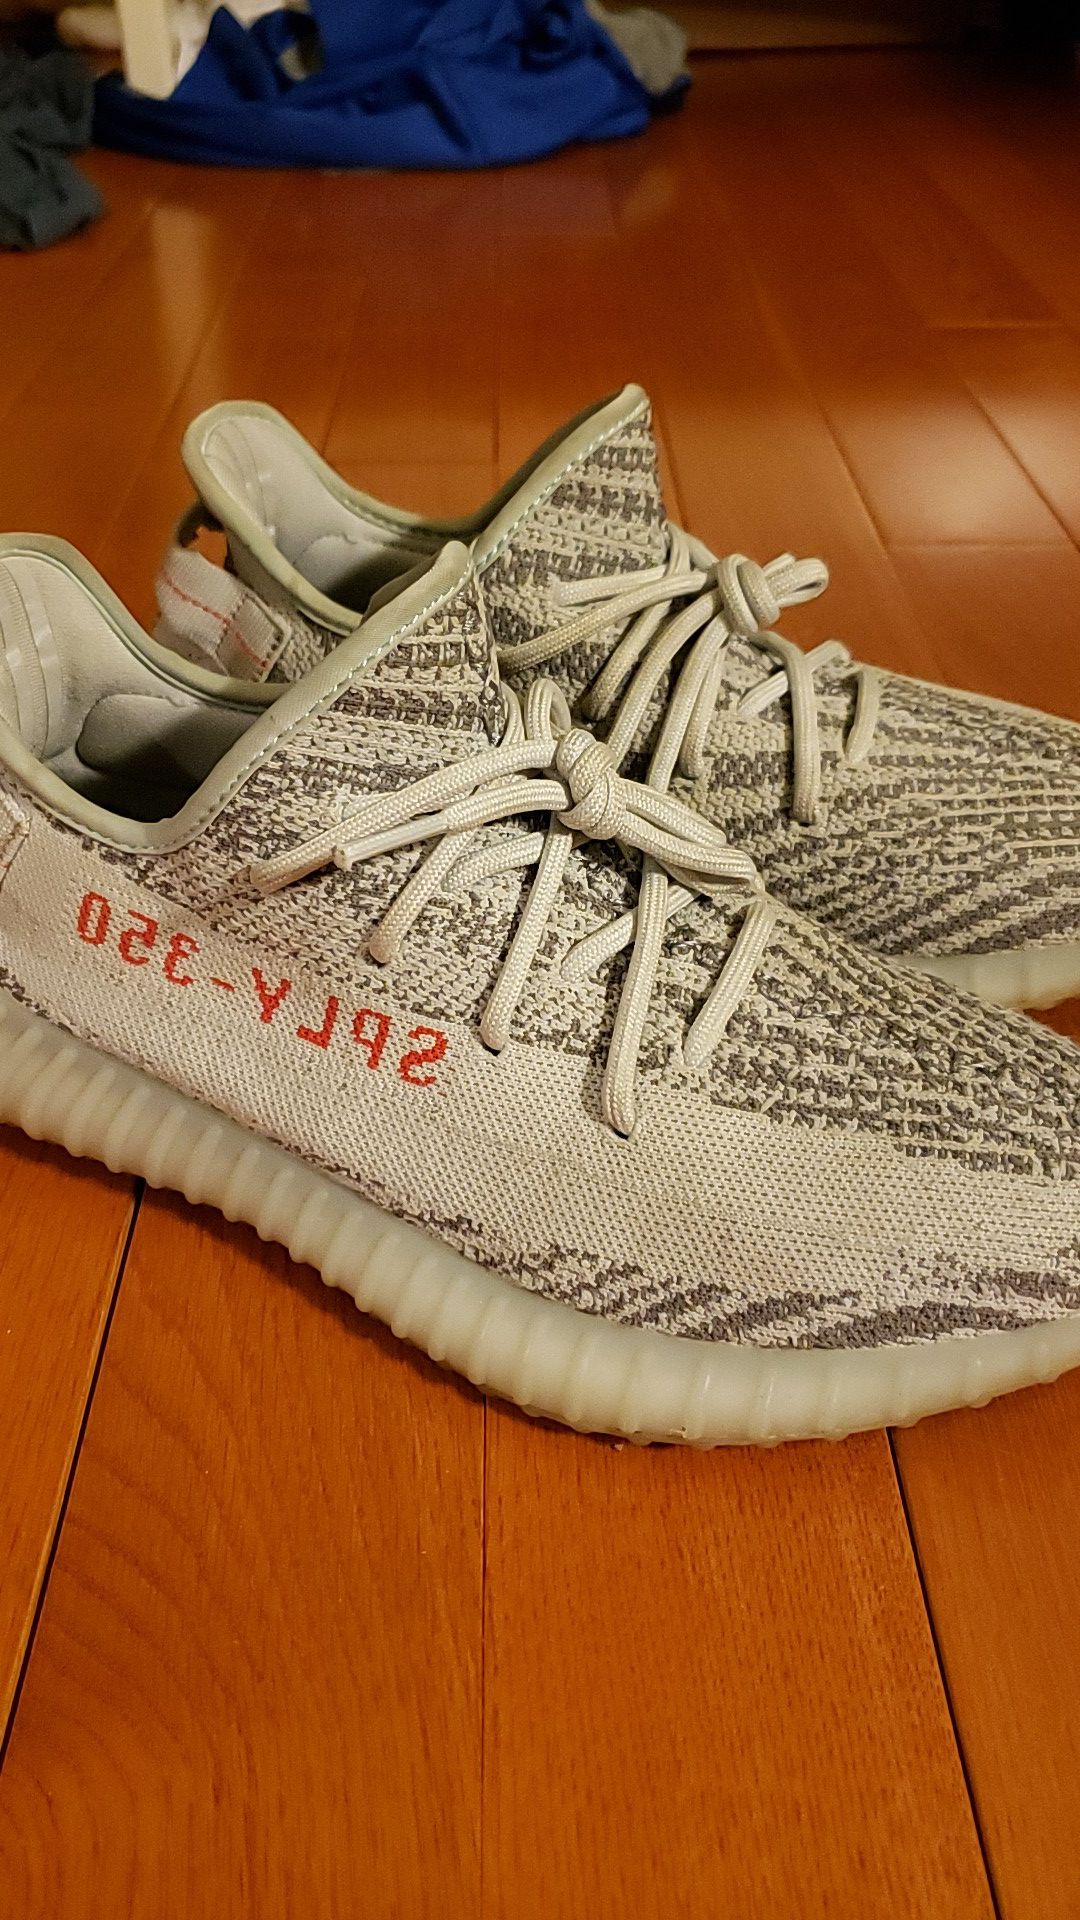 Used 100% Authentic Blue tint Yeezy